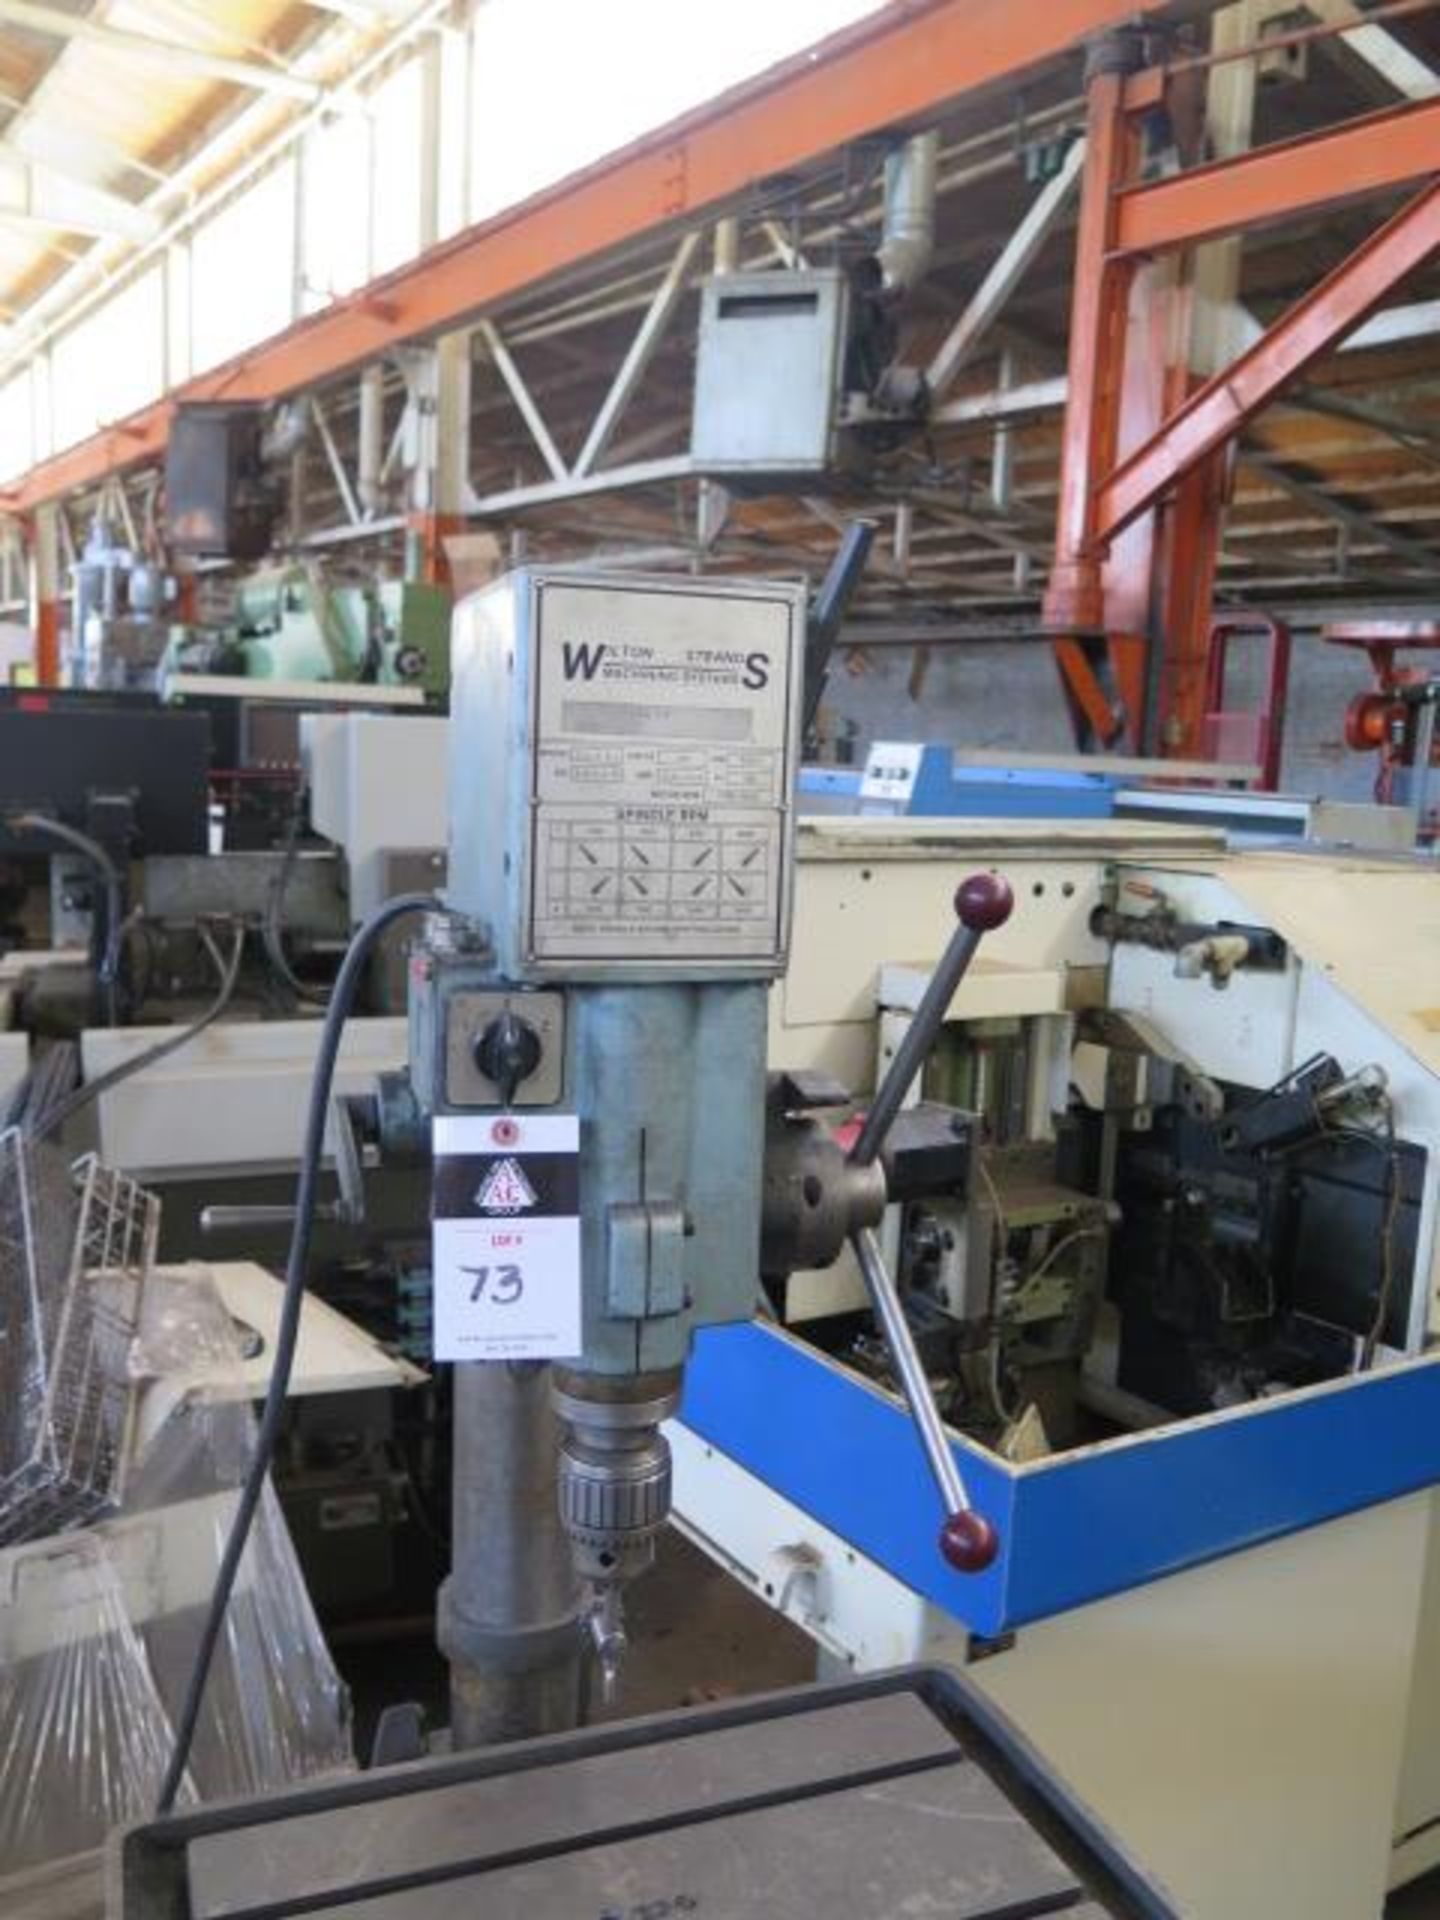 Wilton Strand 20606 Geared Head Drill Press s/n 84908 w/ 120-3000 RPM, 18" x 25" Table, SOLD AS IS - Image 2 of 6